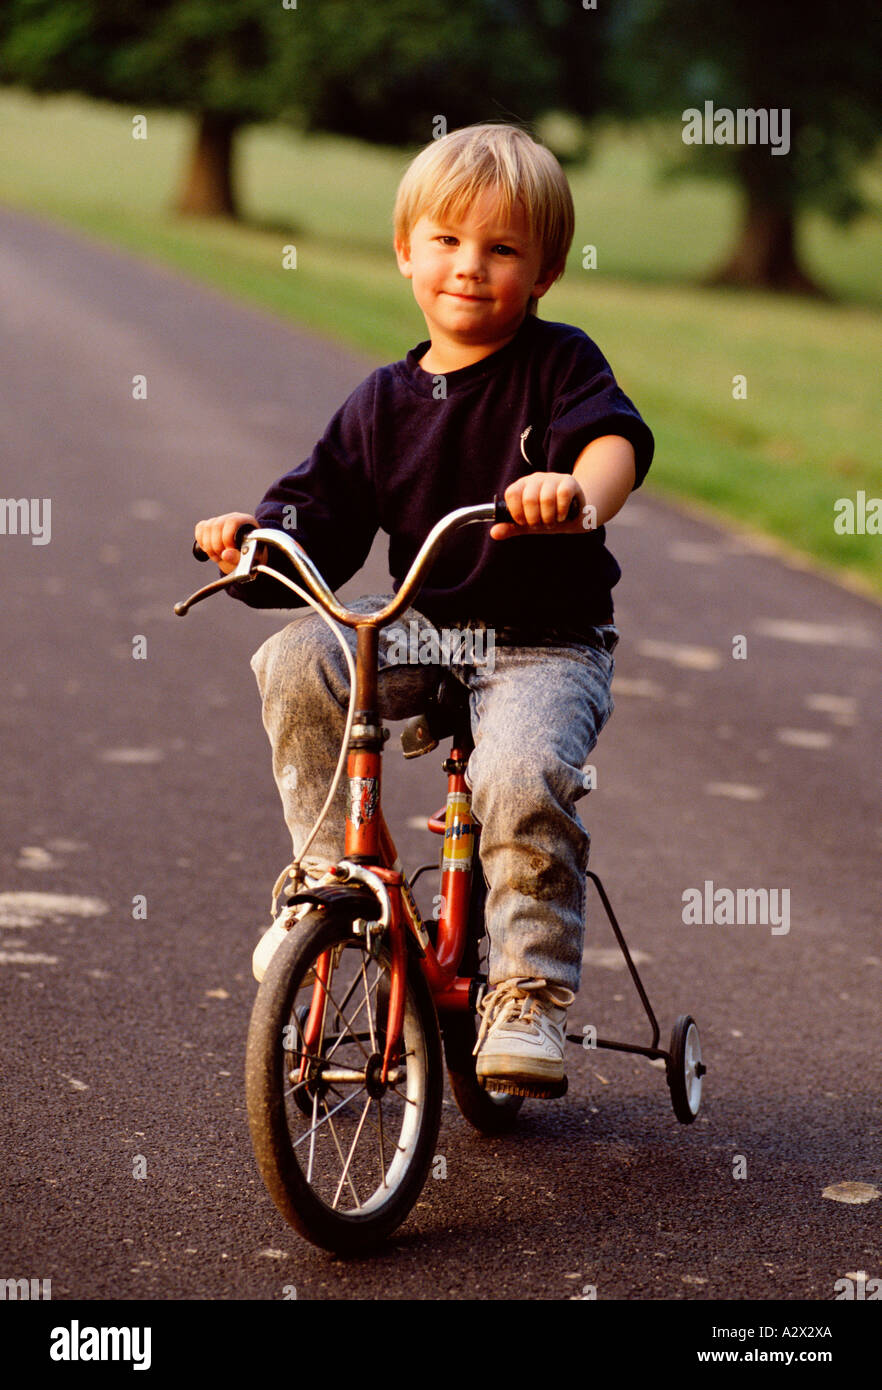 Young fair haired boy on bicycle with stabilizers on road in park. Stock Photo